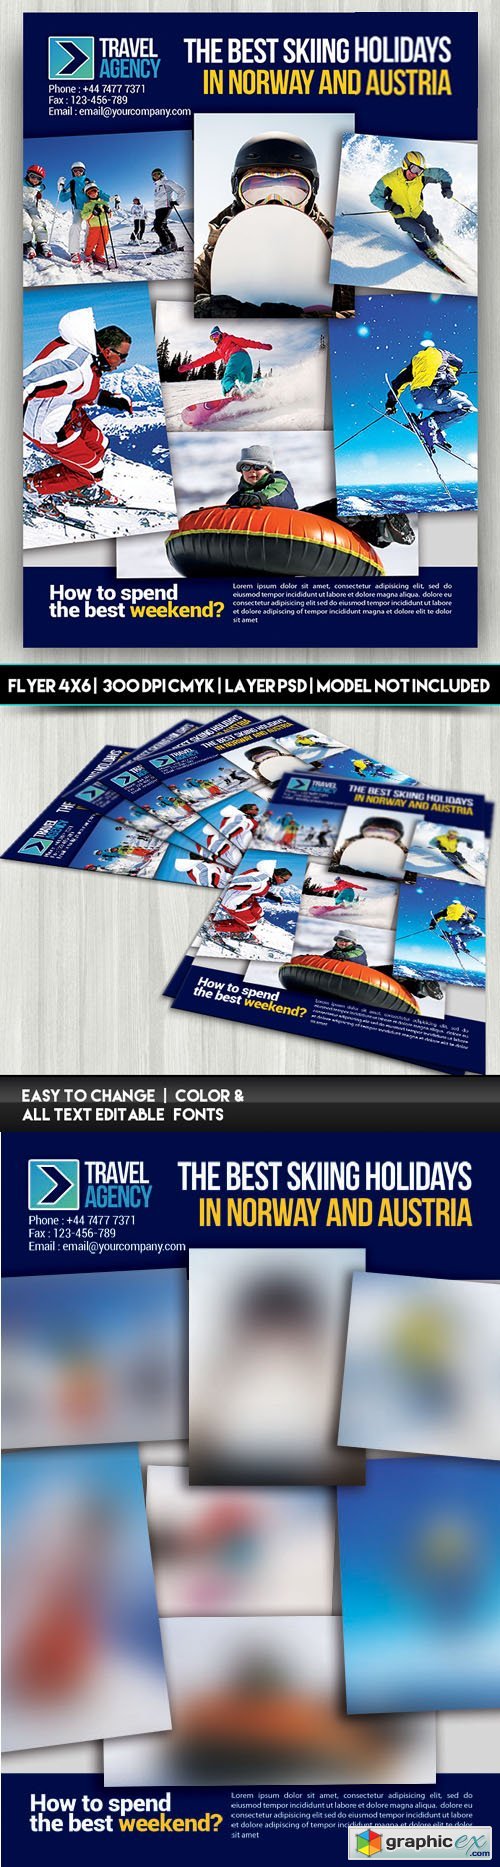 Travel Agency - Flyer PSD Template